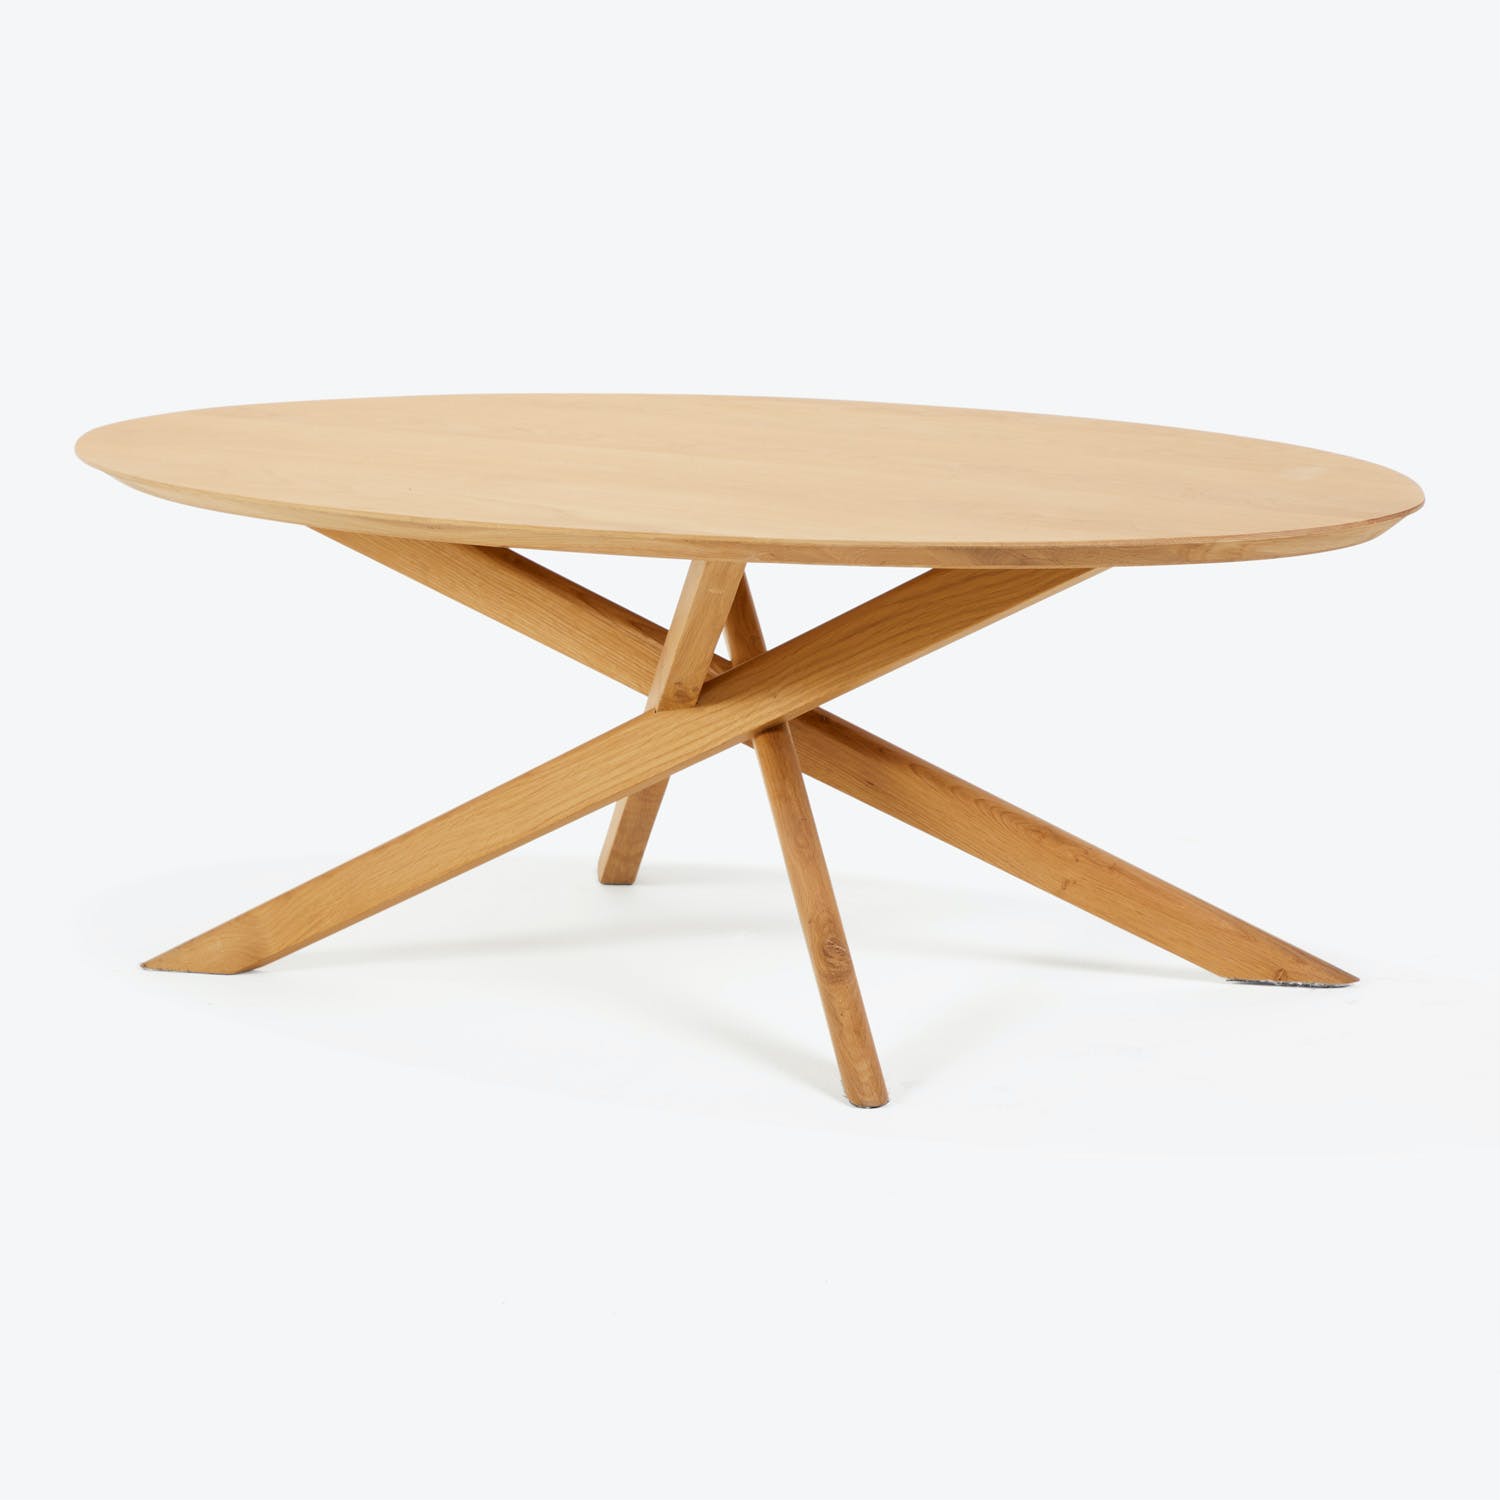 Simplistic modern wooden table with intersecting x-shaped legs on white background.